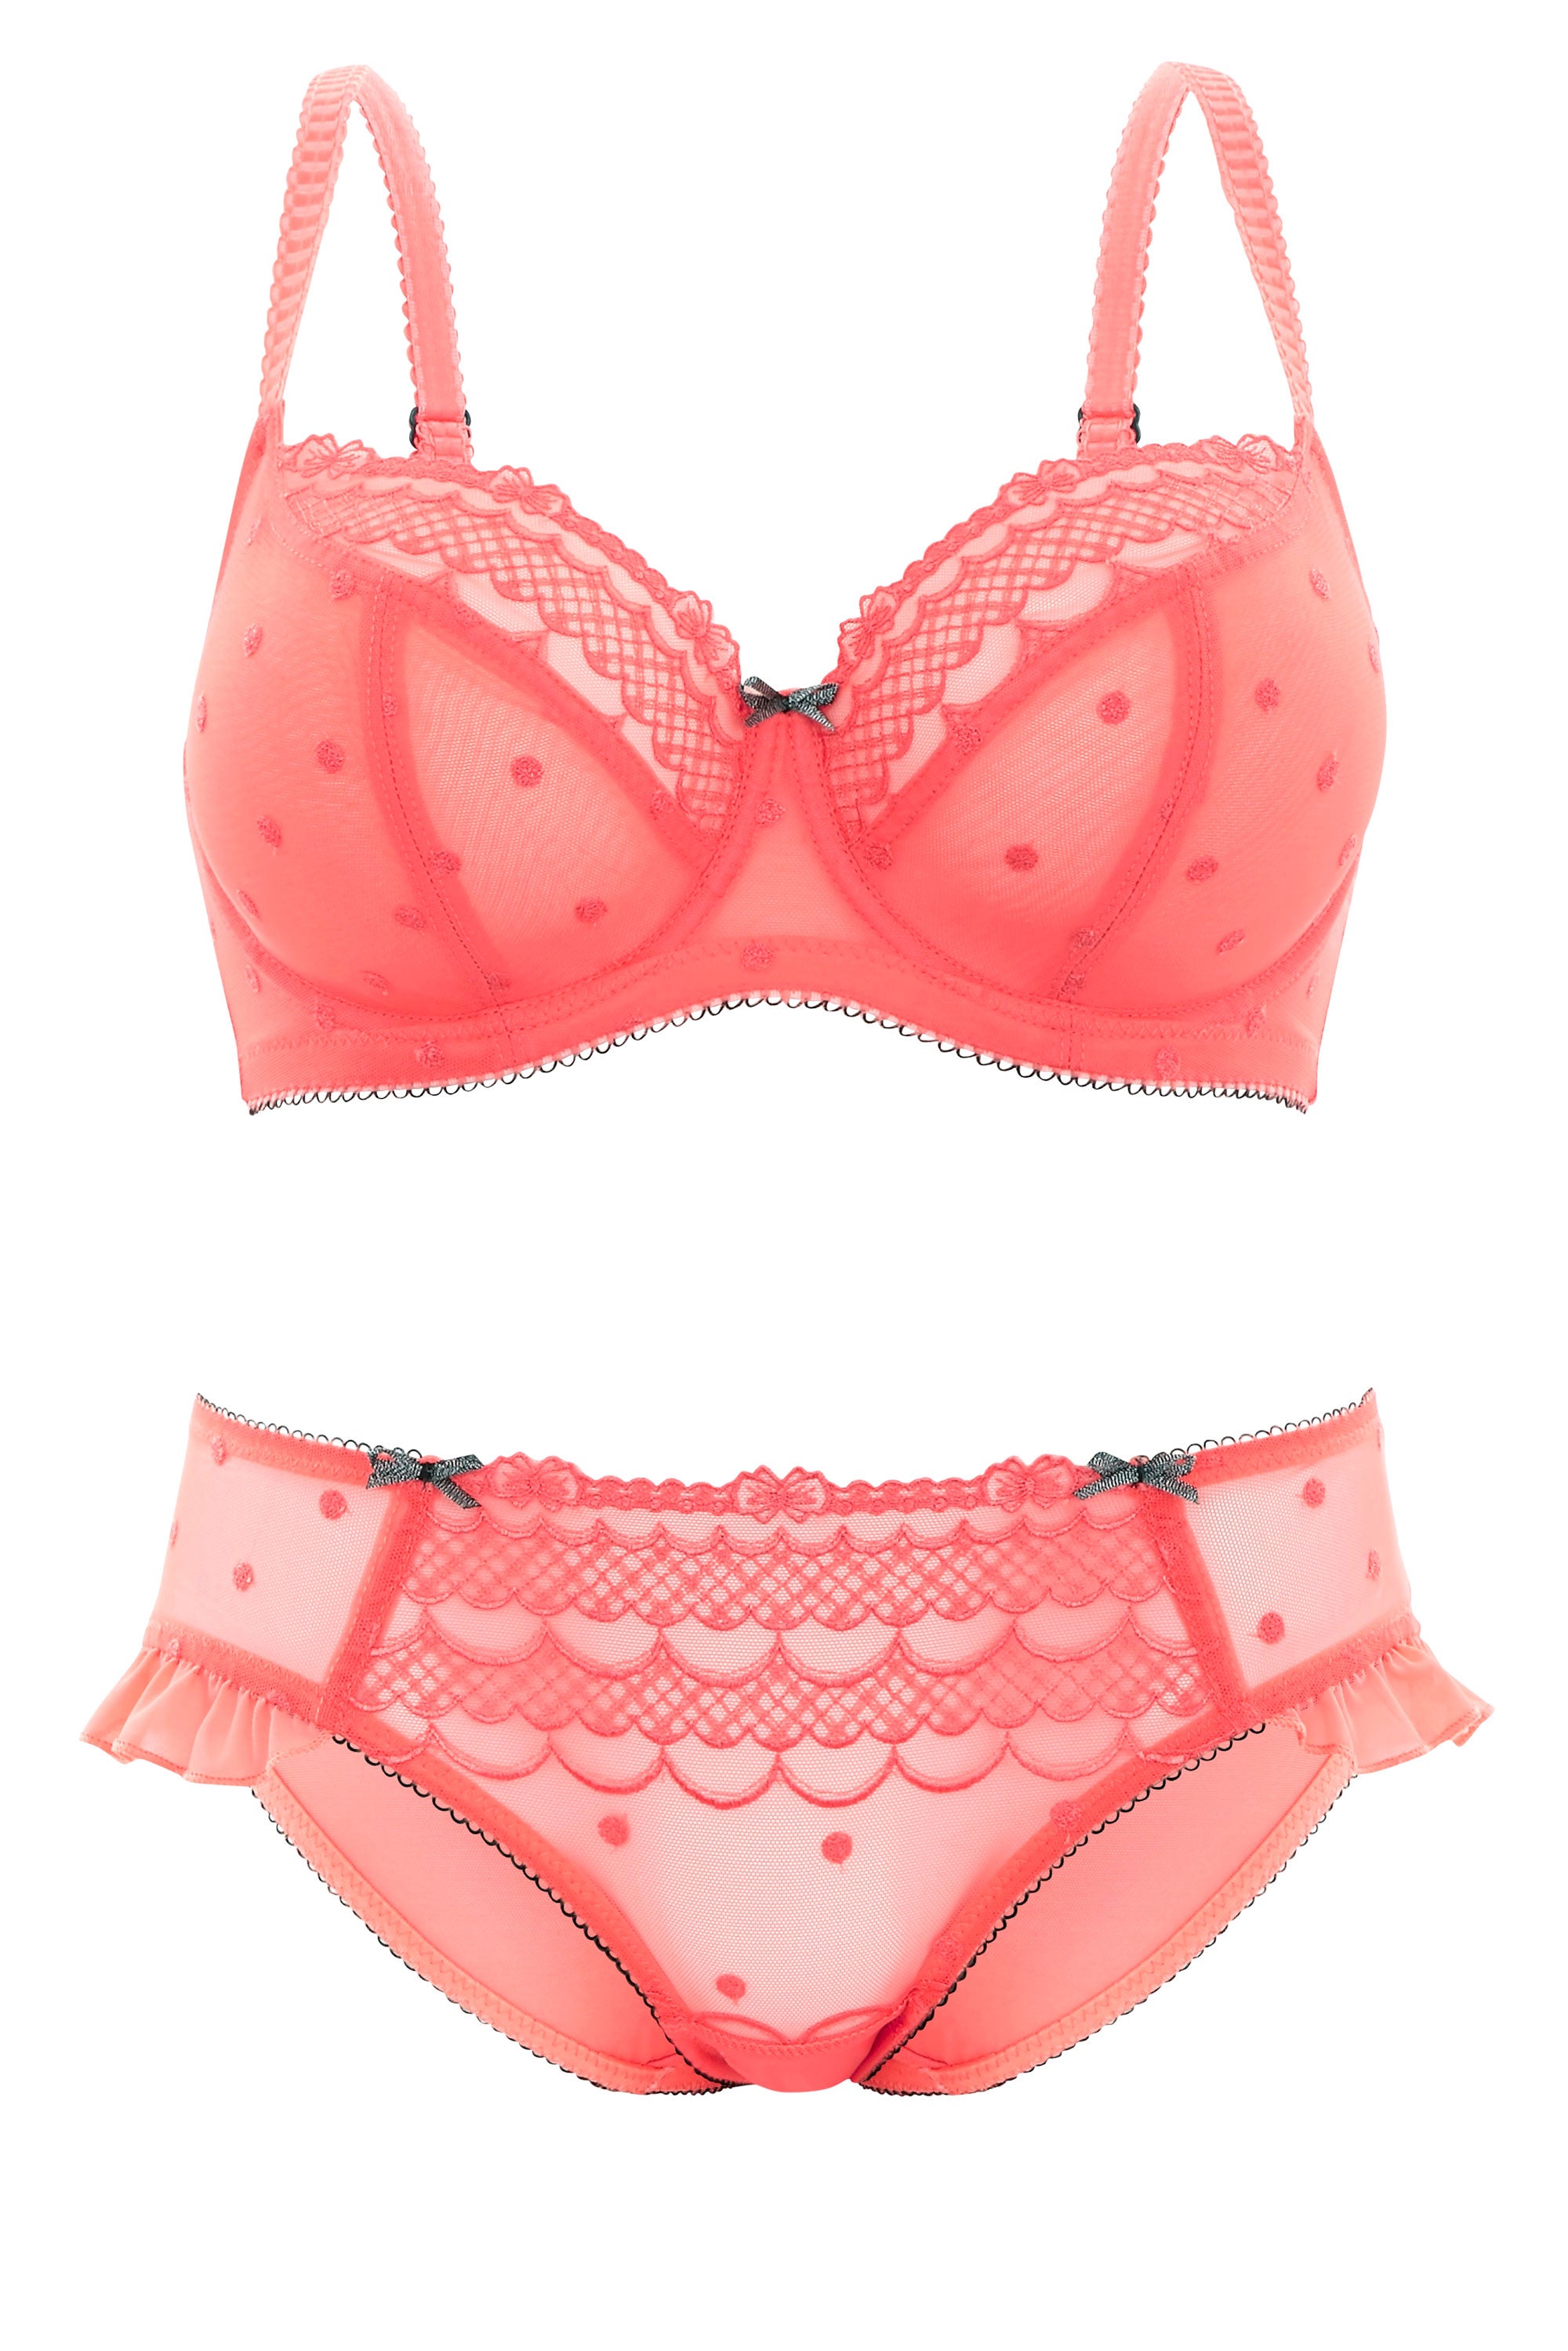 You'll Fall in Love With These Pretty Lingerie Sets
